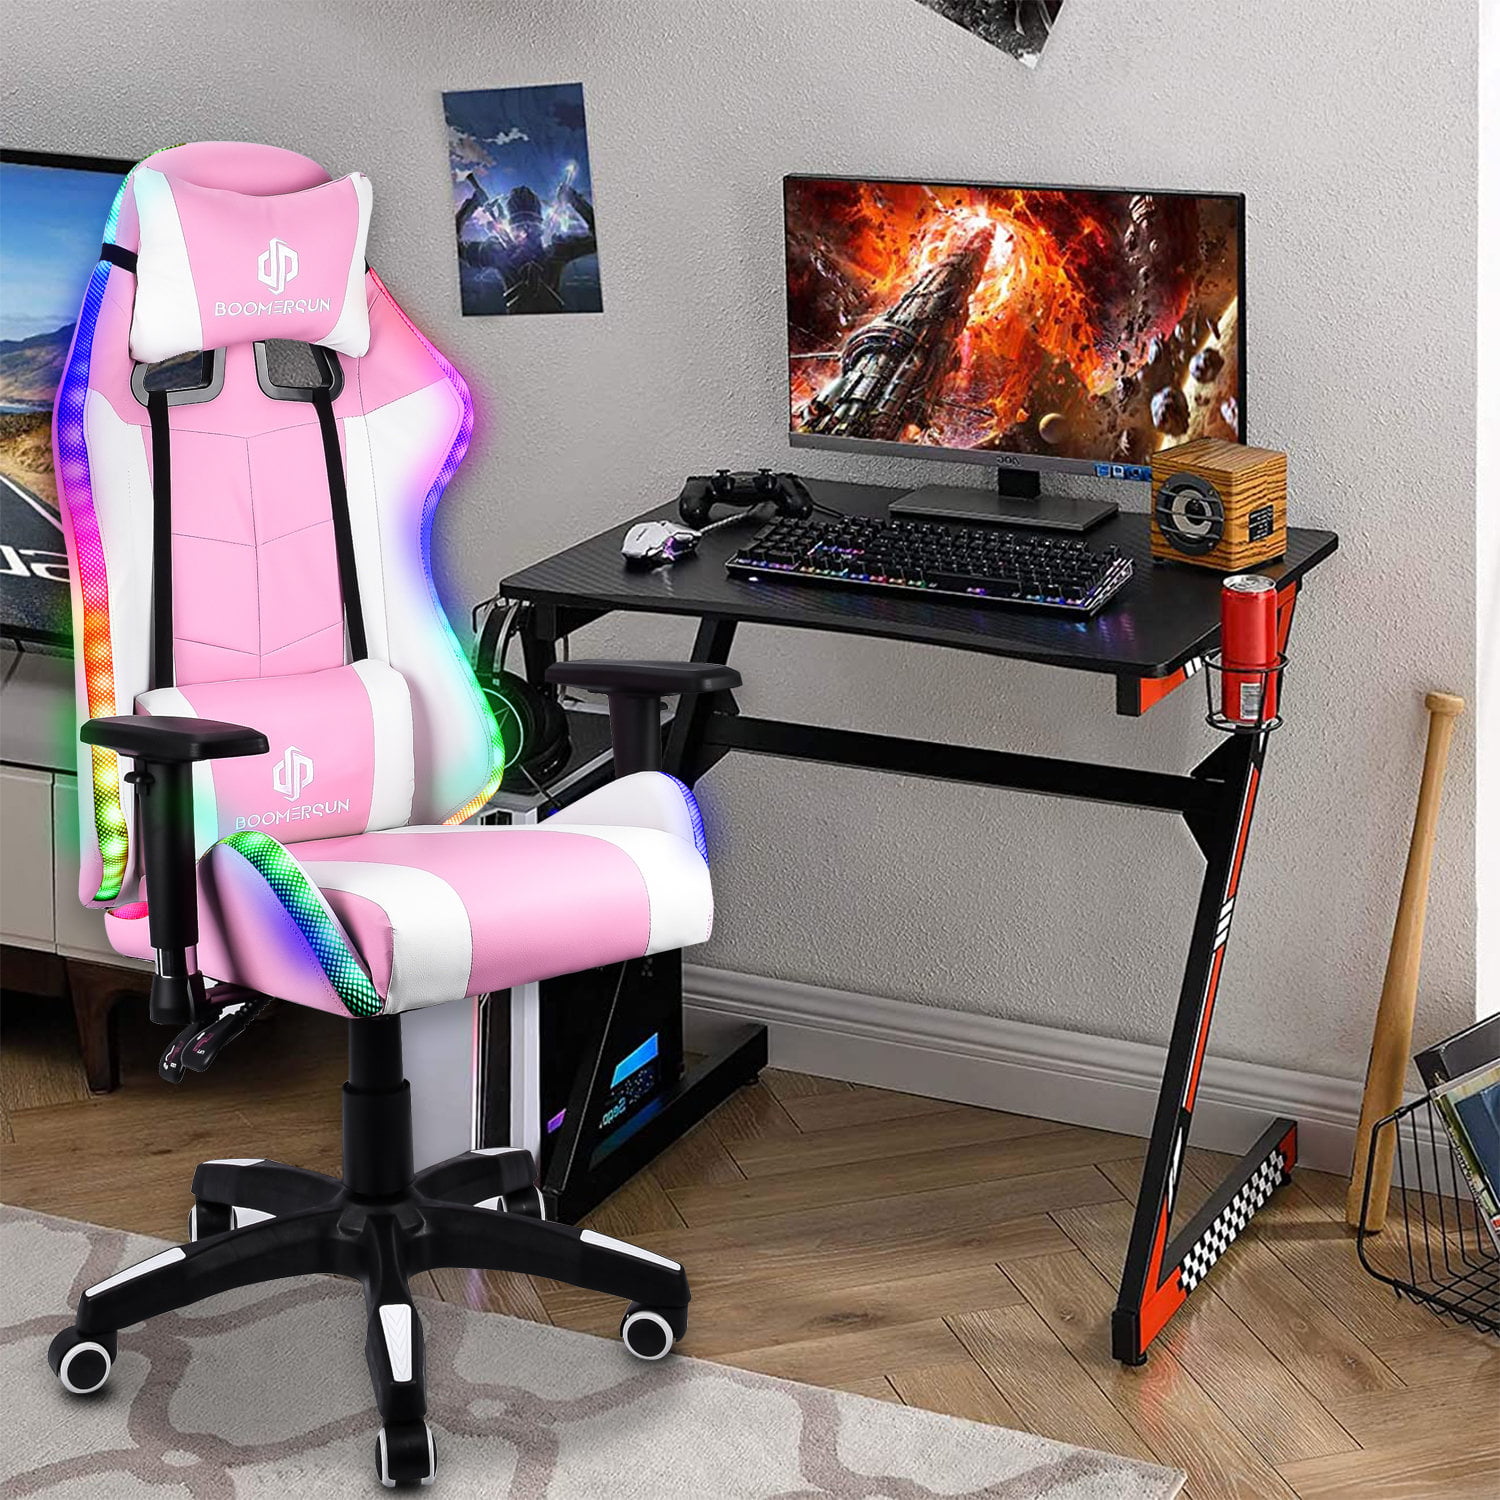 Boomersun Gaming Chair with RGB Light and remote control, Ergonomic Office Chair Backrest and Seat Height Adjustable 3D Armrests, Game Chair with Headrest and Lumbar Support - Pink - Walmart.com